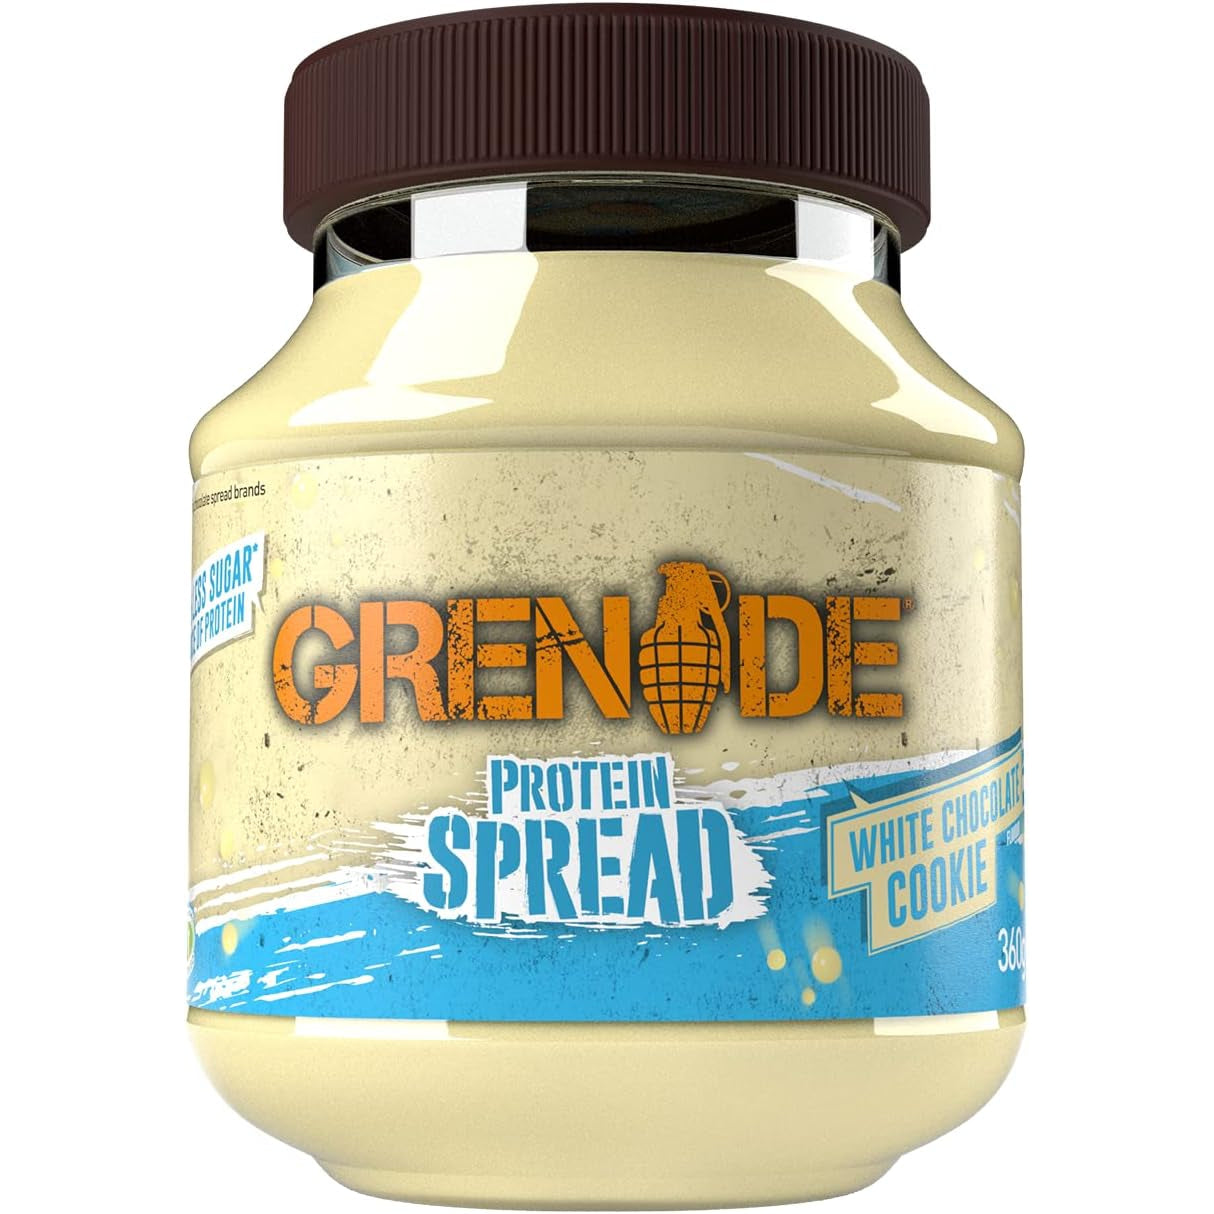 Grenade Chocolate White Chocolate Cookie Protein Spread 360g